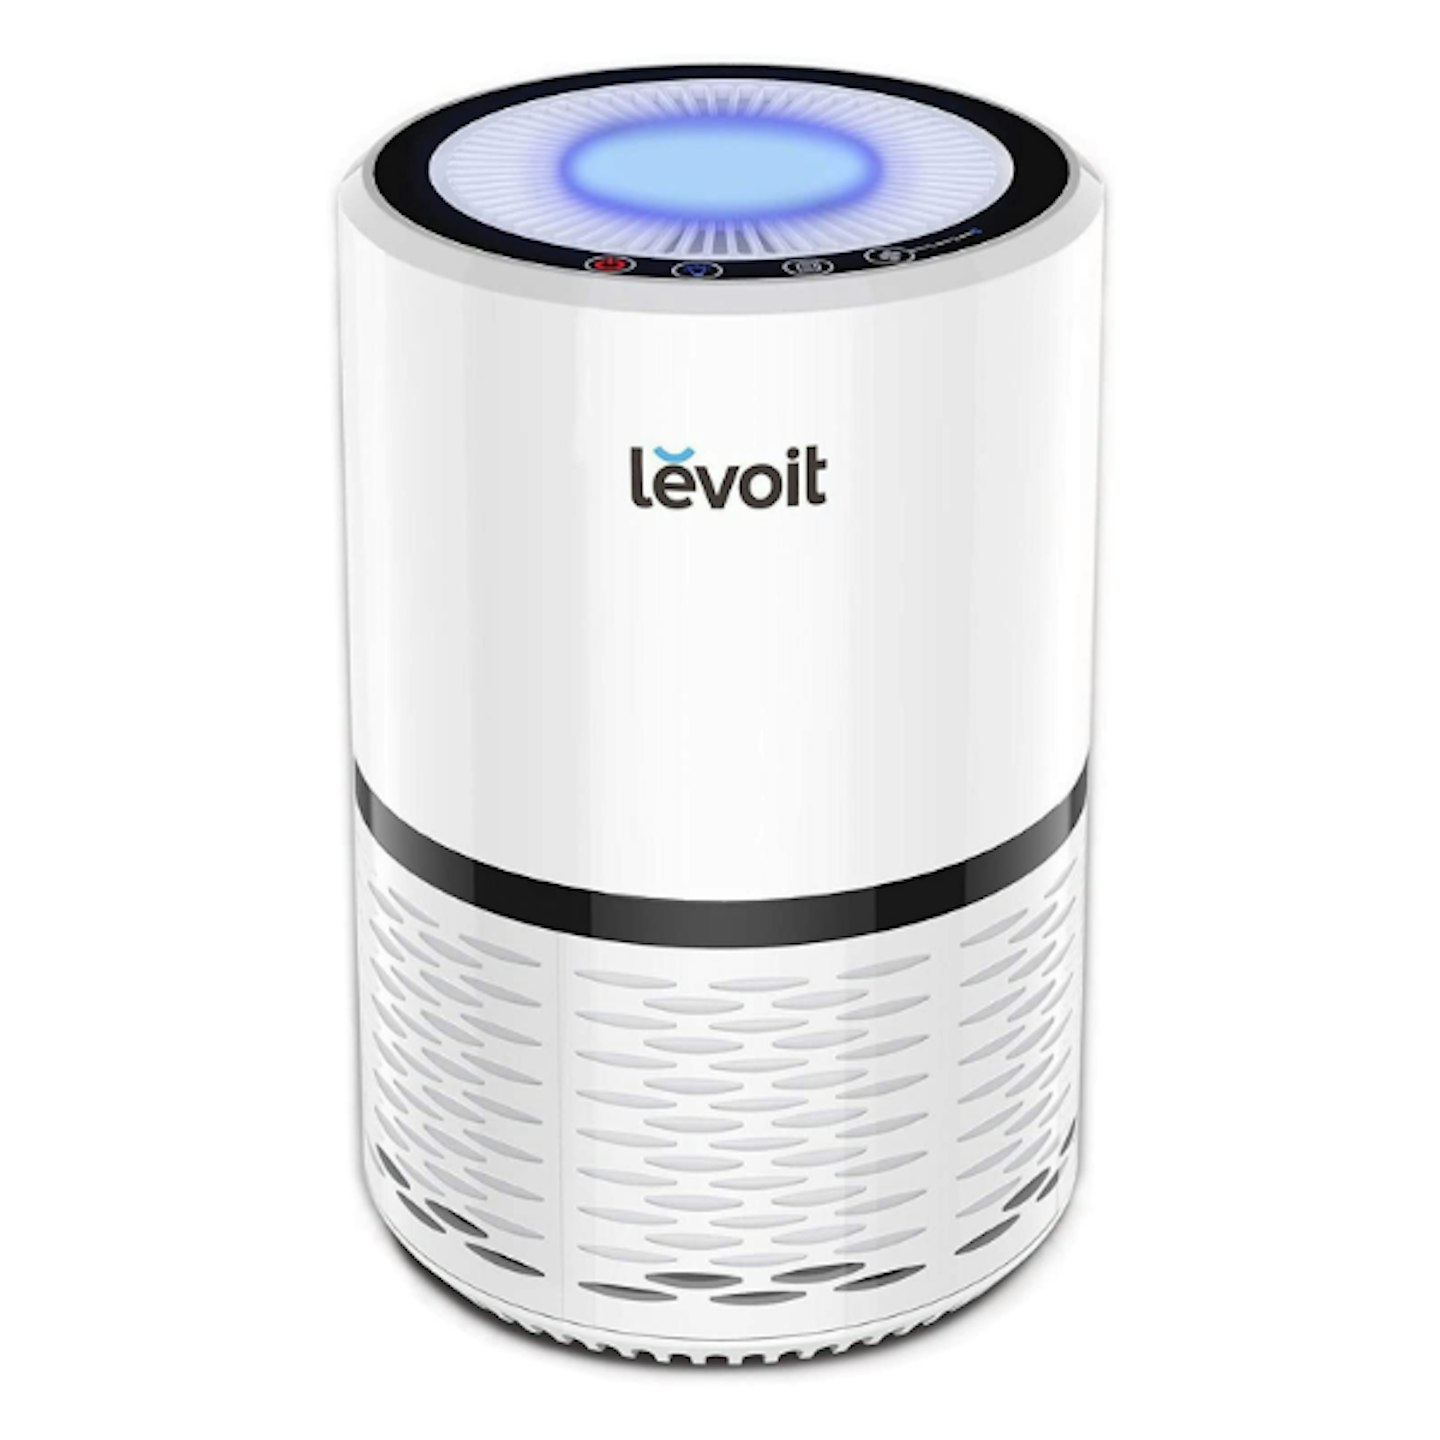 Levoit Air Purifier with HEPA Filter